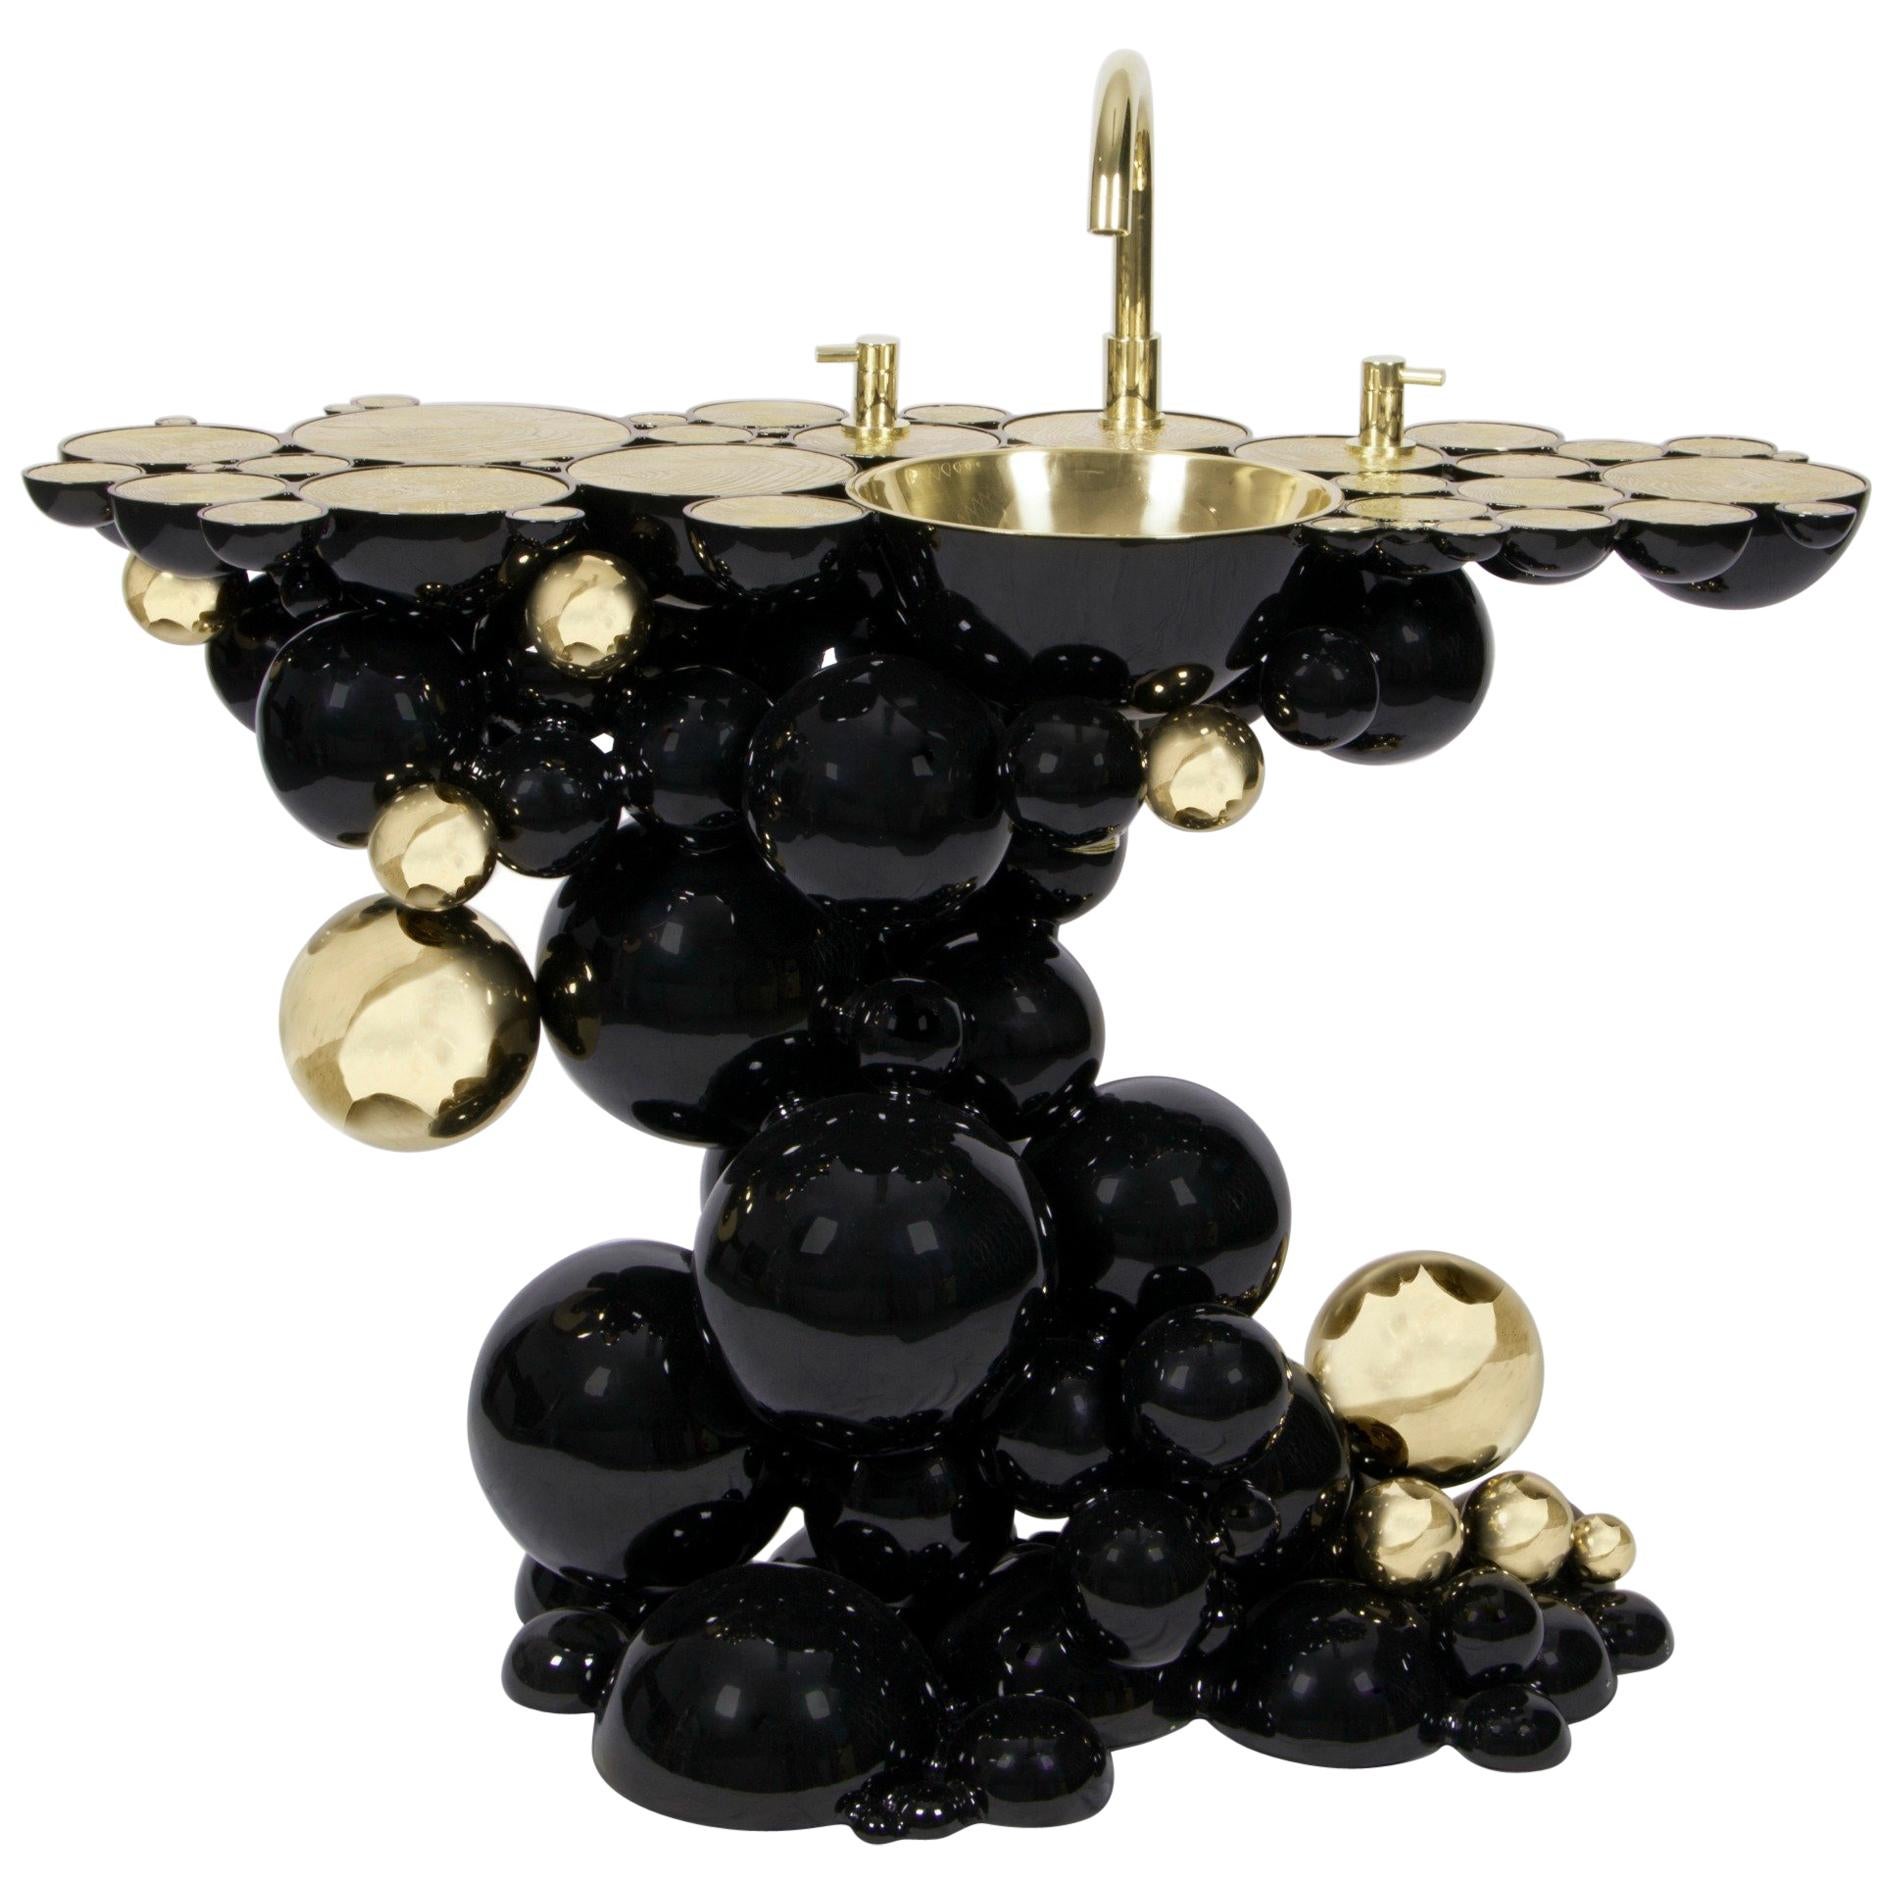 Newton Washbasin in Black Lacquer with Gold Details